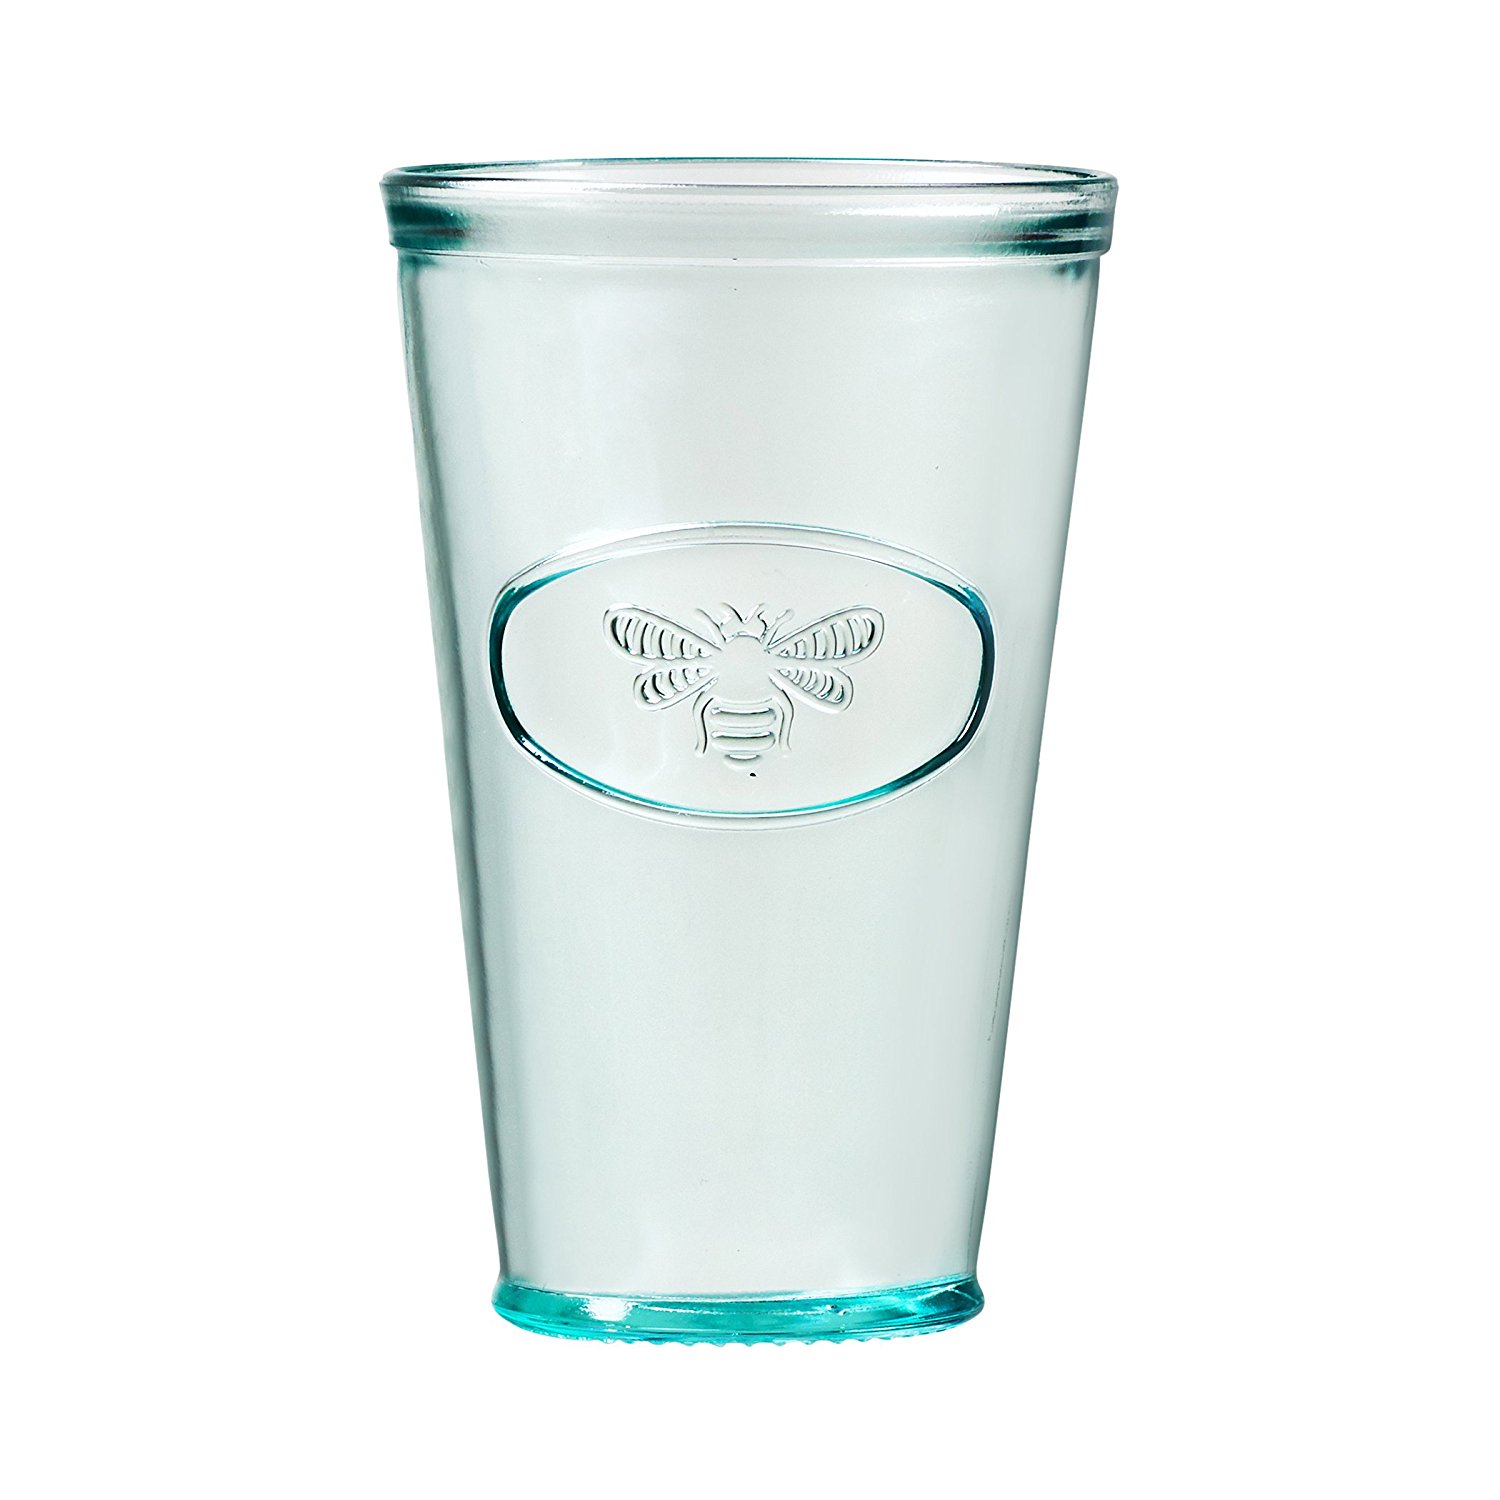 How cute is the little bee detail on this mint green glass? 